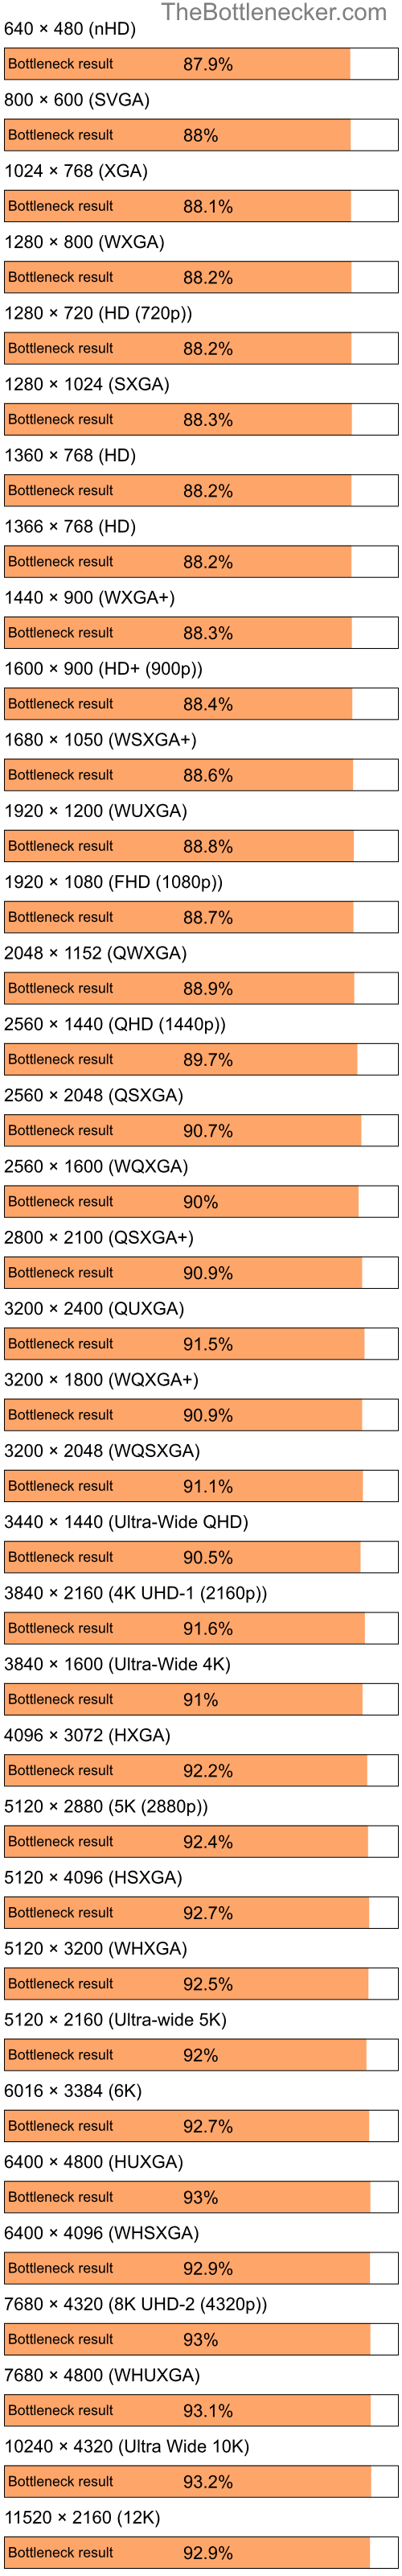 Bottleneck results by resolution for Intel Pentium 4 and AMD Mobility Radeon 9200 in Processor Intense Tasks